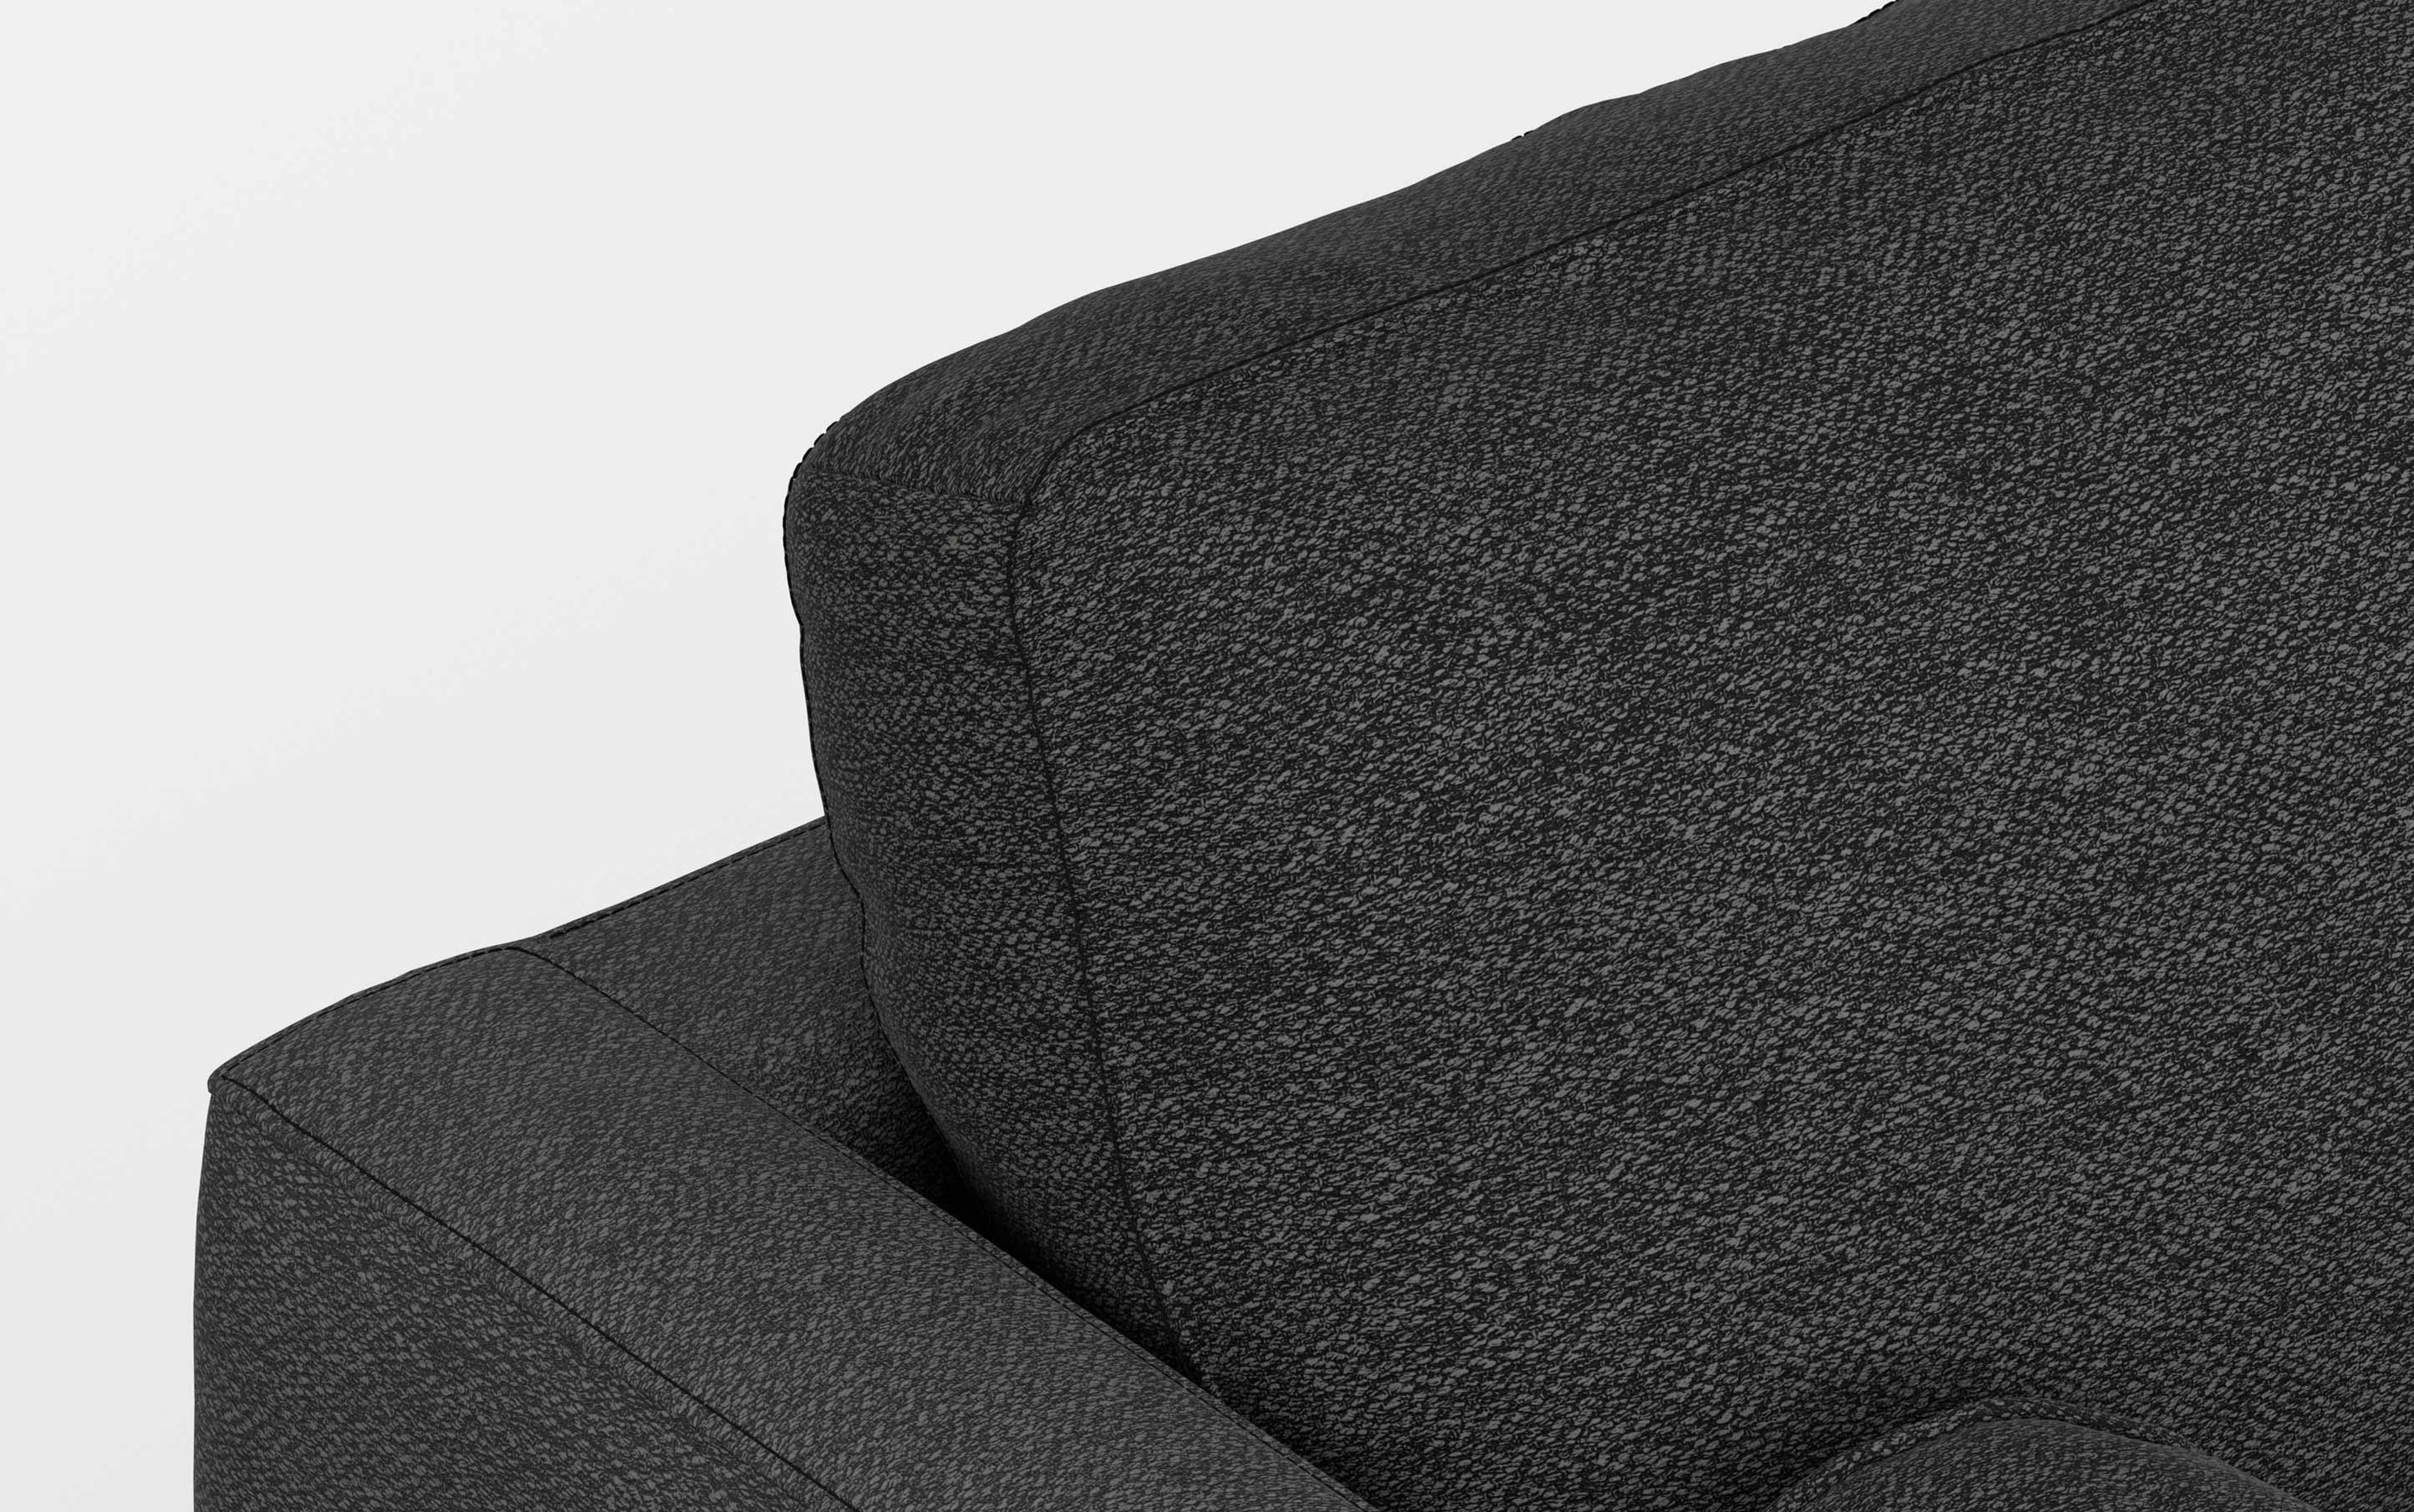 Charcoal Grey Woven Polyester Fabric | Morrison 72-inch Sofa and Ottoman Set in Woven-Blend Fabric